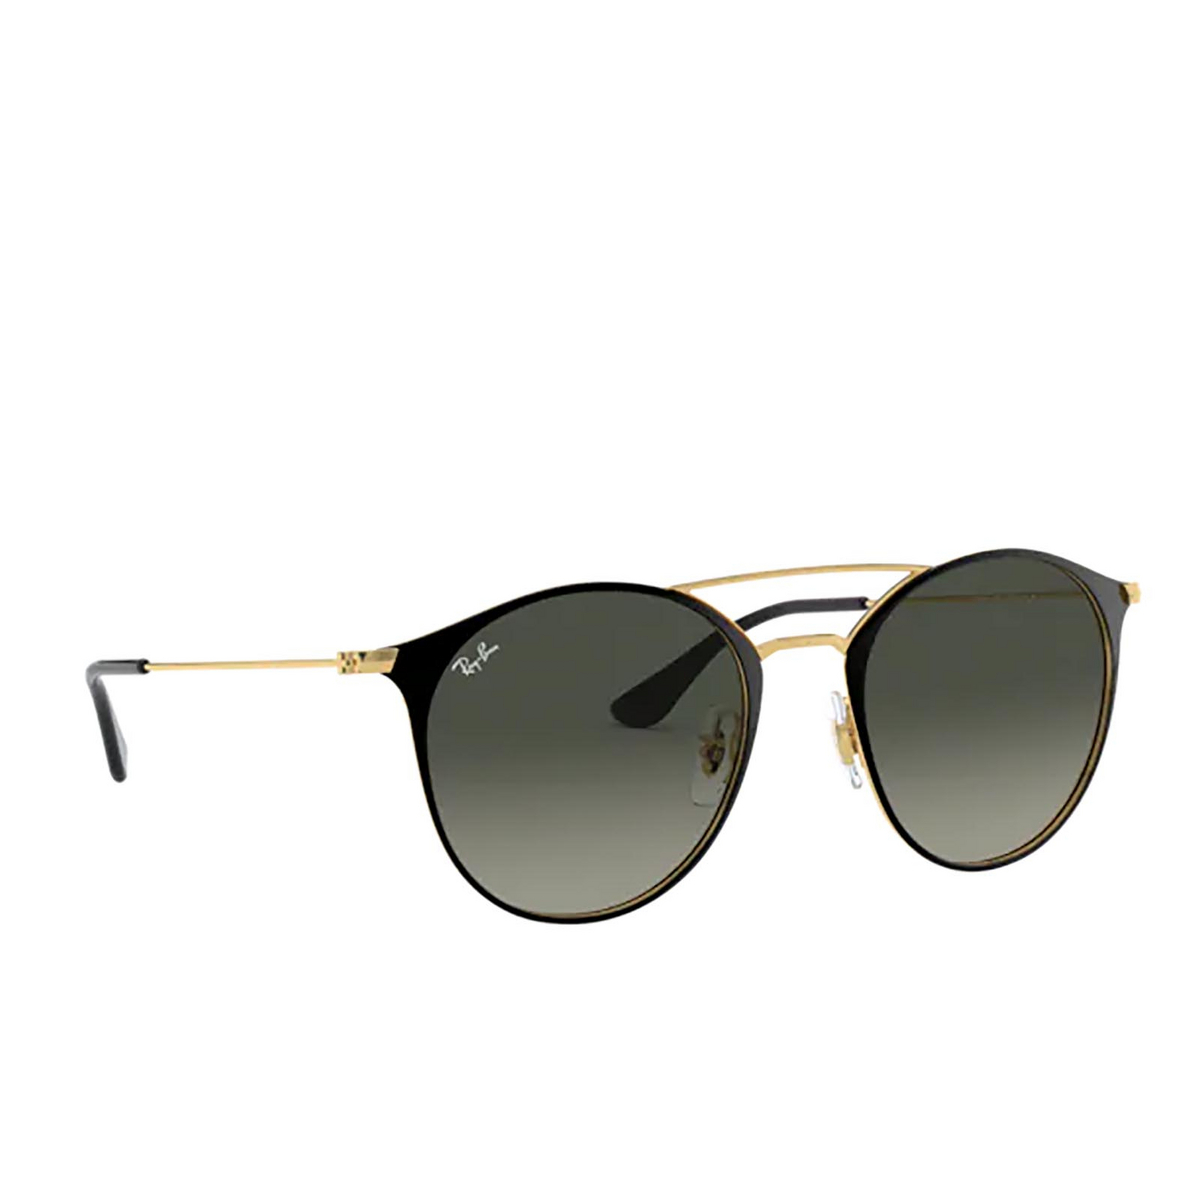 Ray-Ban® Round Sunglasses: RB3546 color 187/71 Black On Arista - 2/3